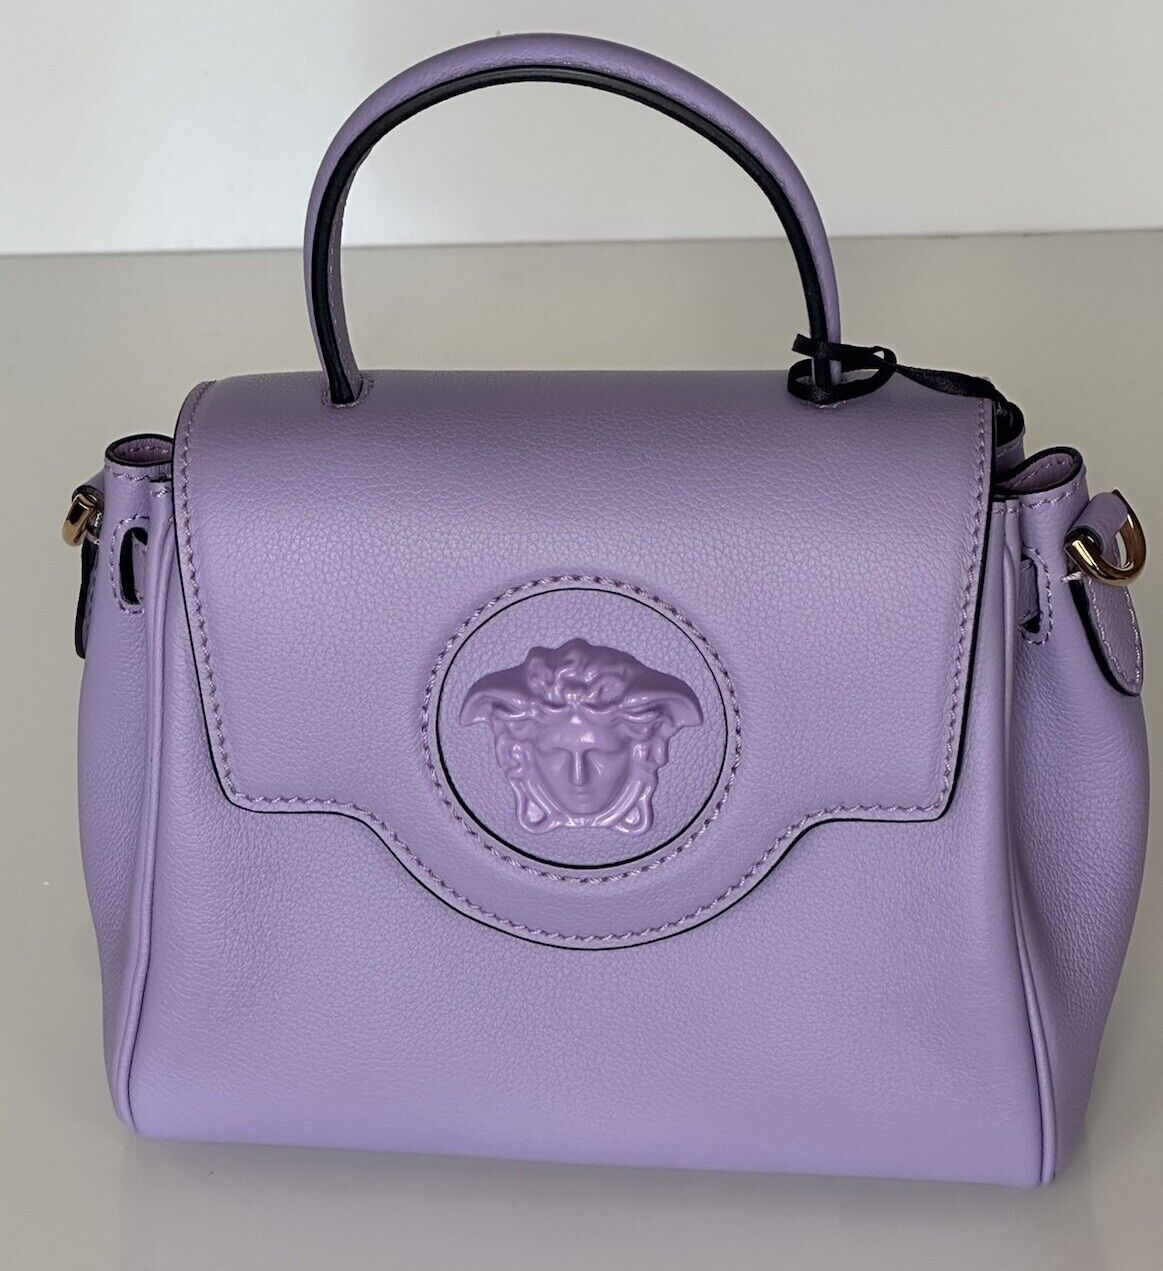 NWT $2125 Versace Top Handle Leather Purple Small Shoulder Bag DBFI040 Italy